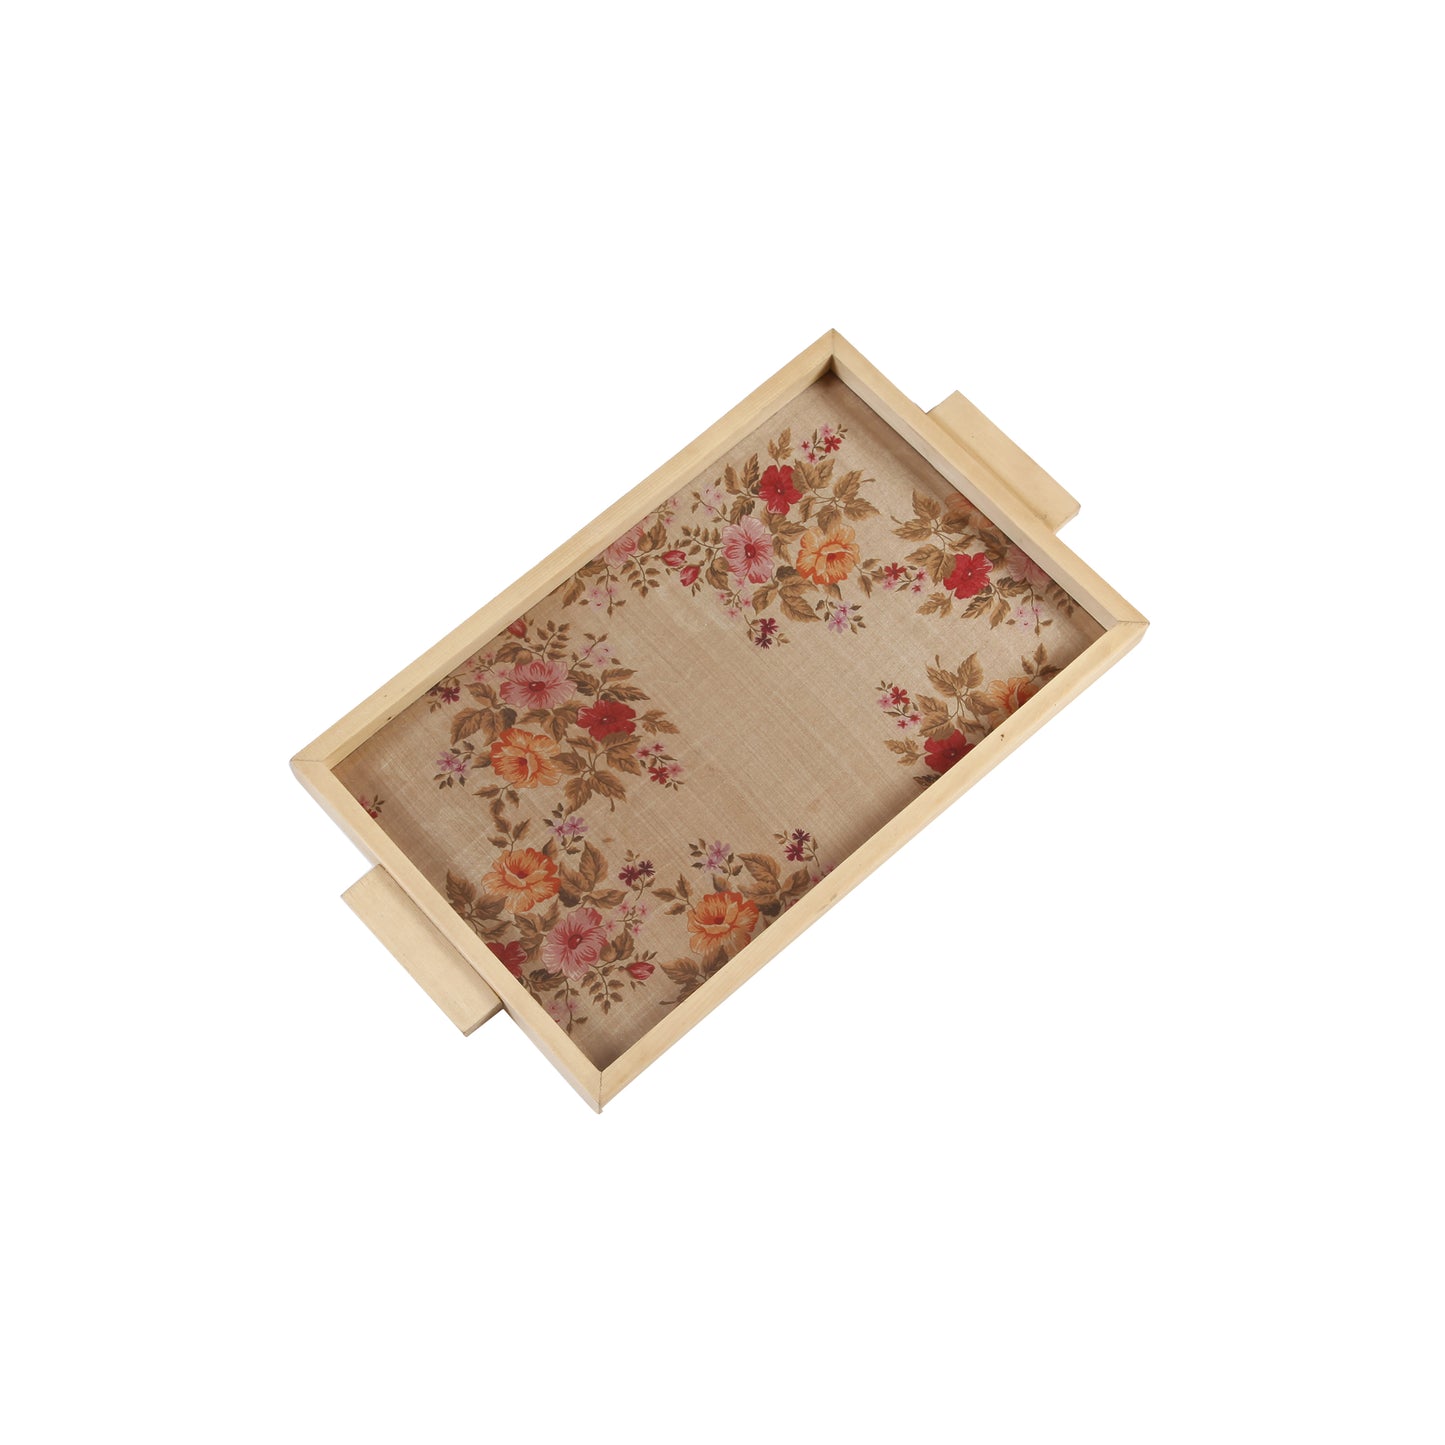 A Tiny Mistake Flowers Pattern Pine Tray with Handle Serving Pine Wood Tray